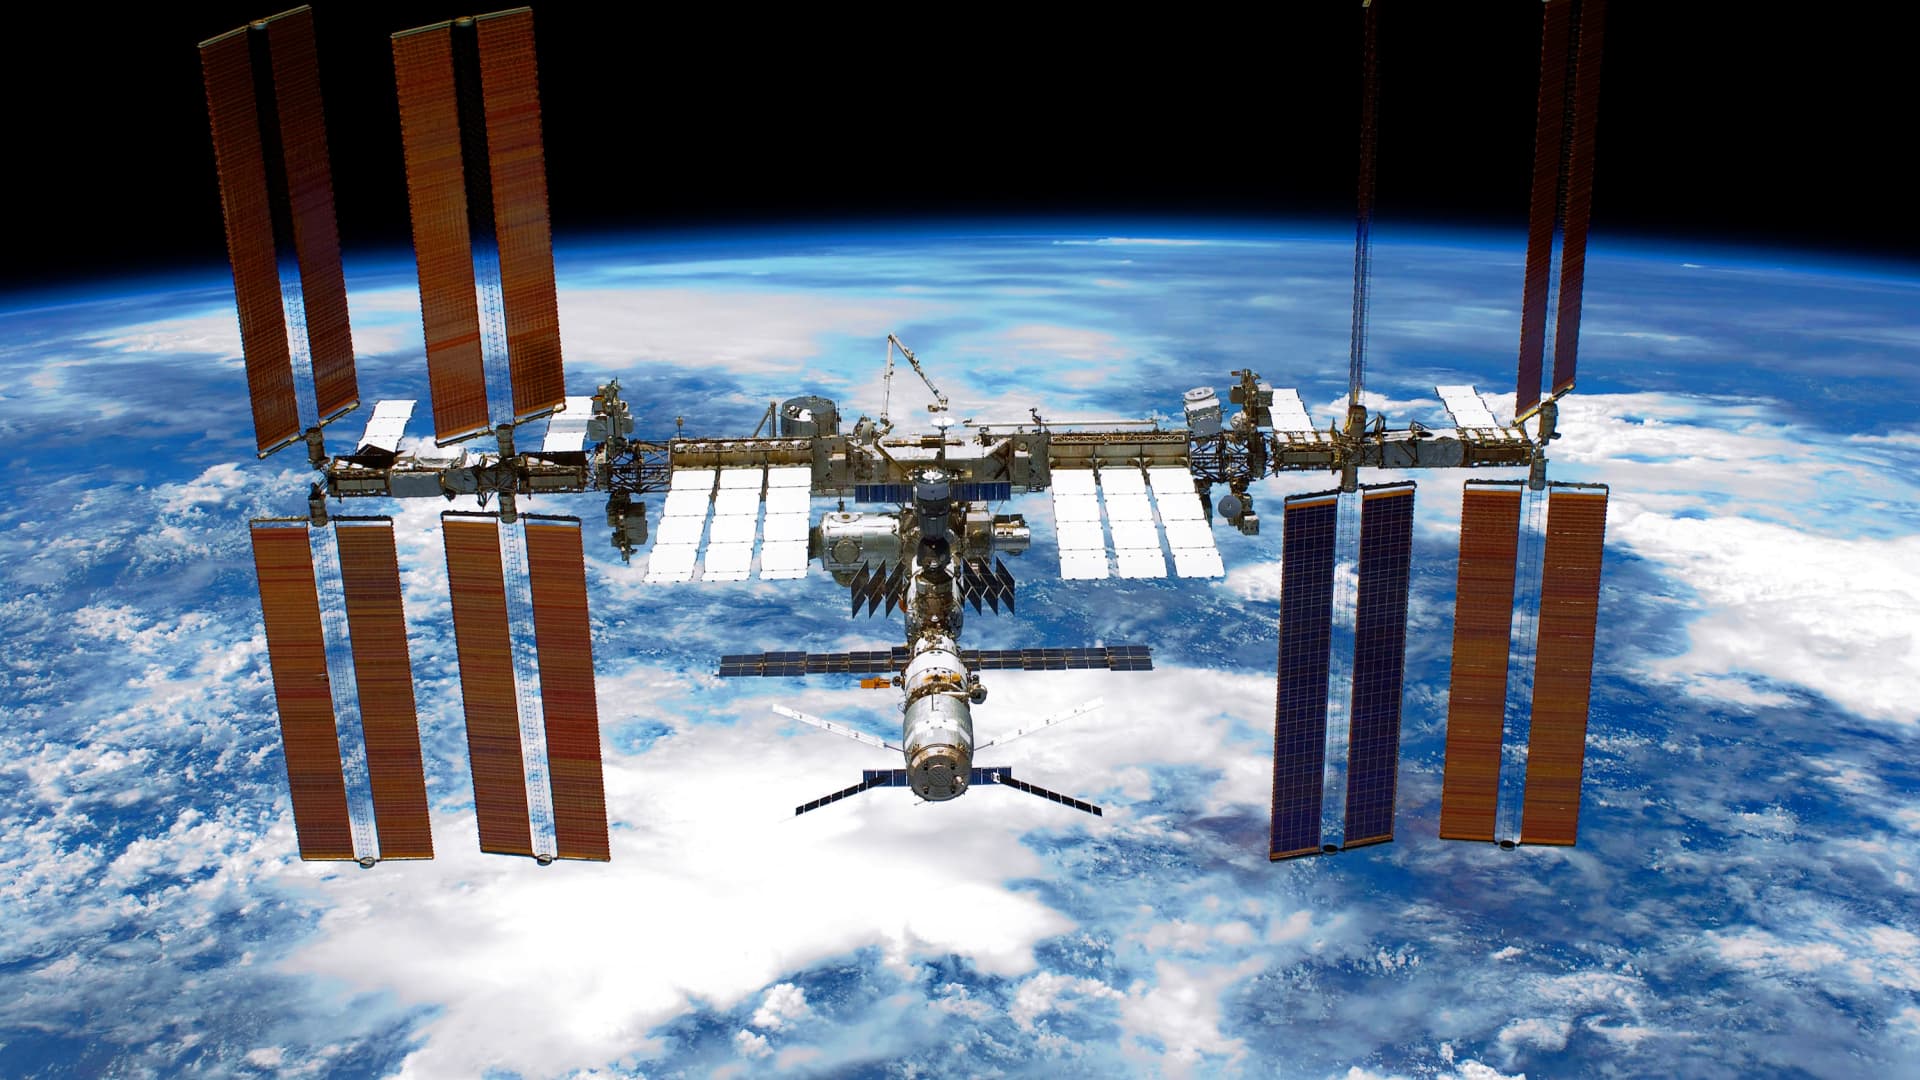 Since last decade, NASA has turned repeatedly to Colorado companies to produce the technology it needs to not only send astronauts on new lunar missions but also to Mars and into the depths of space. Above, the International Space Station.